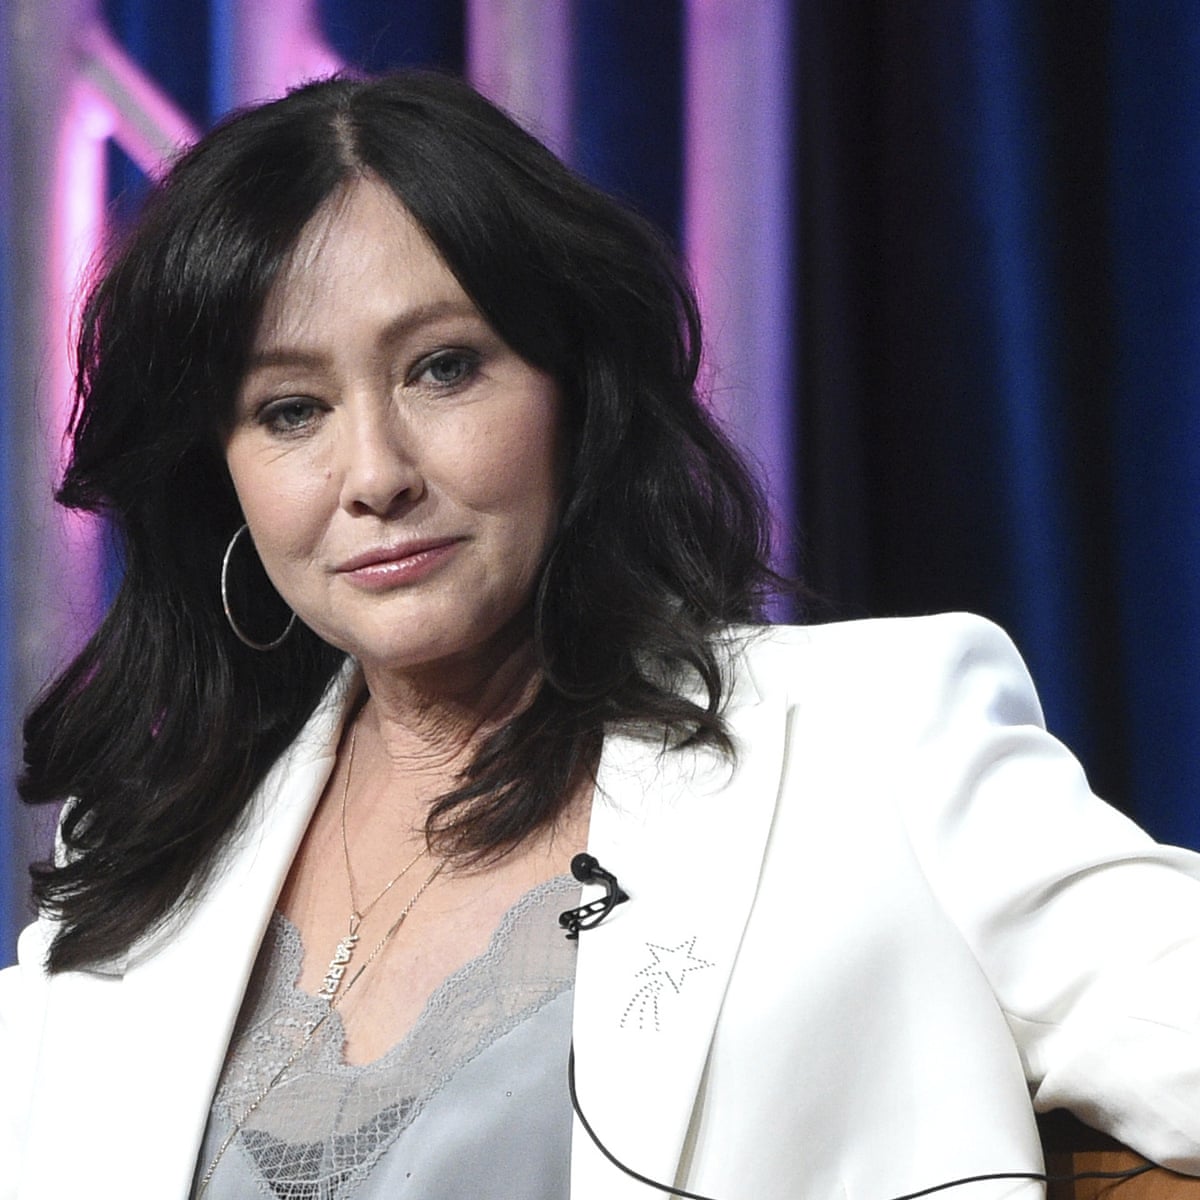 Shannen doherty of photos Shannen Doherty